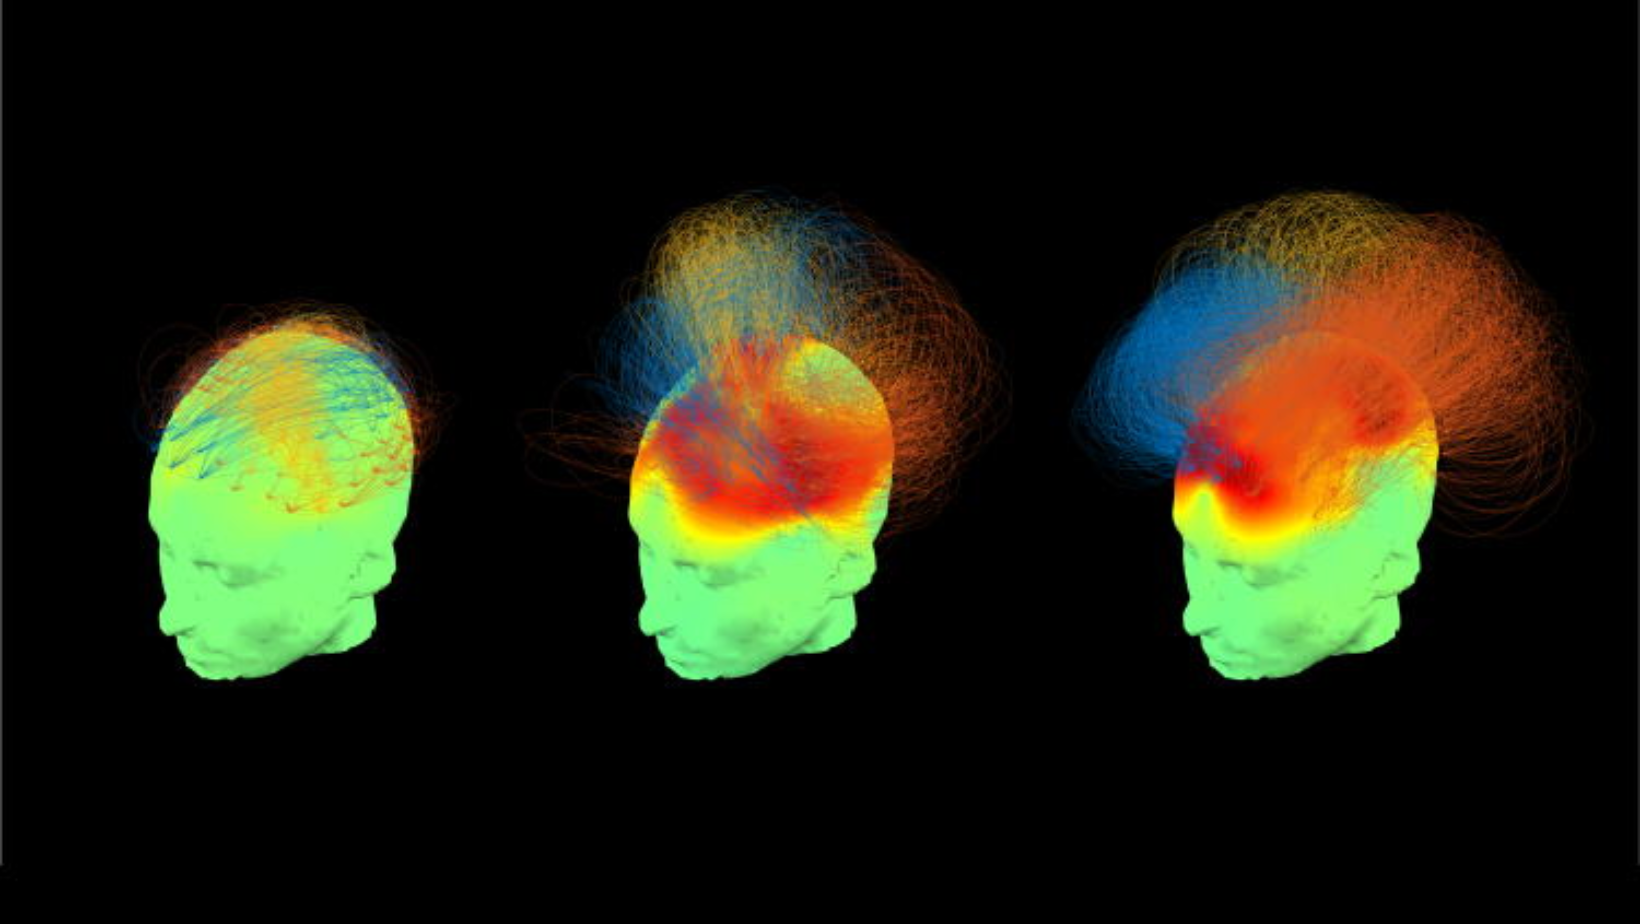 Scientific images of heads with lines coming out of them representing cognitive patterns